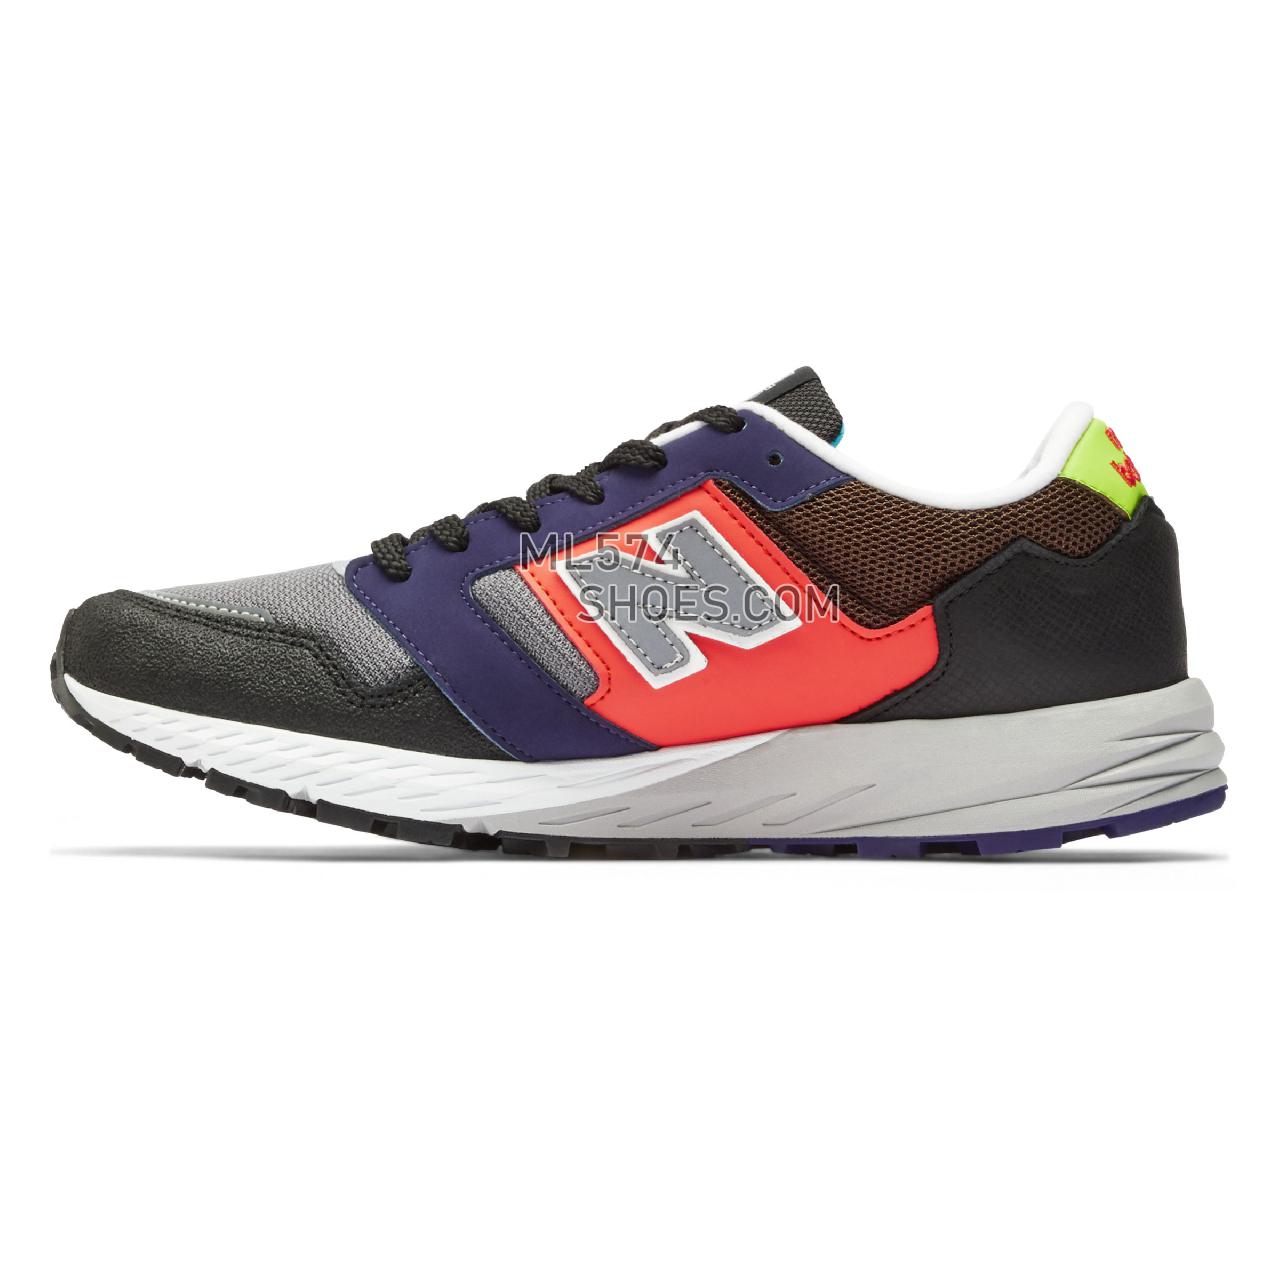 New Balance MADE in UK MTL575 - Men's Made in USA And UK Sneakers - Black with grey and blue - MTL575MM